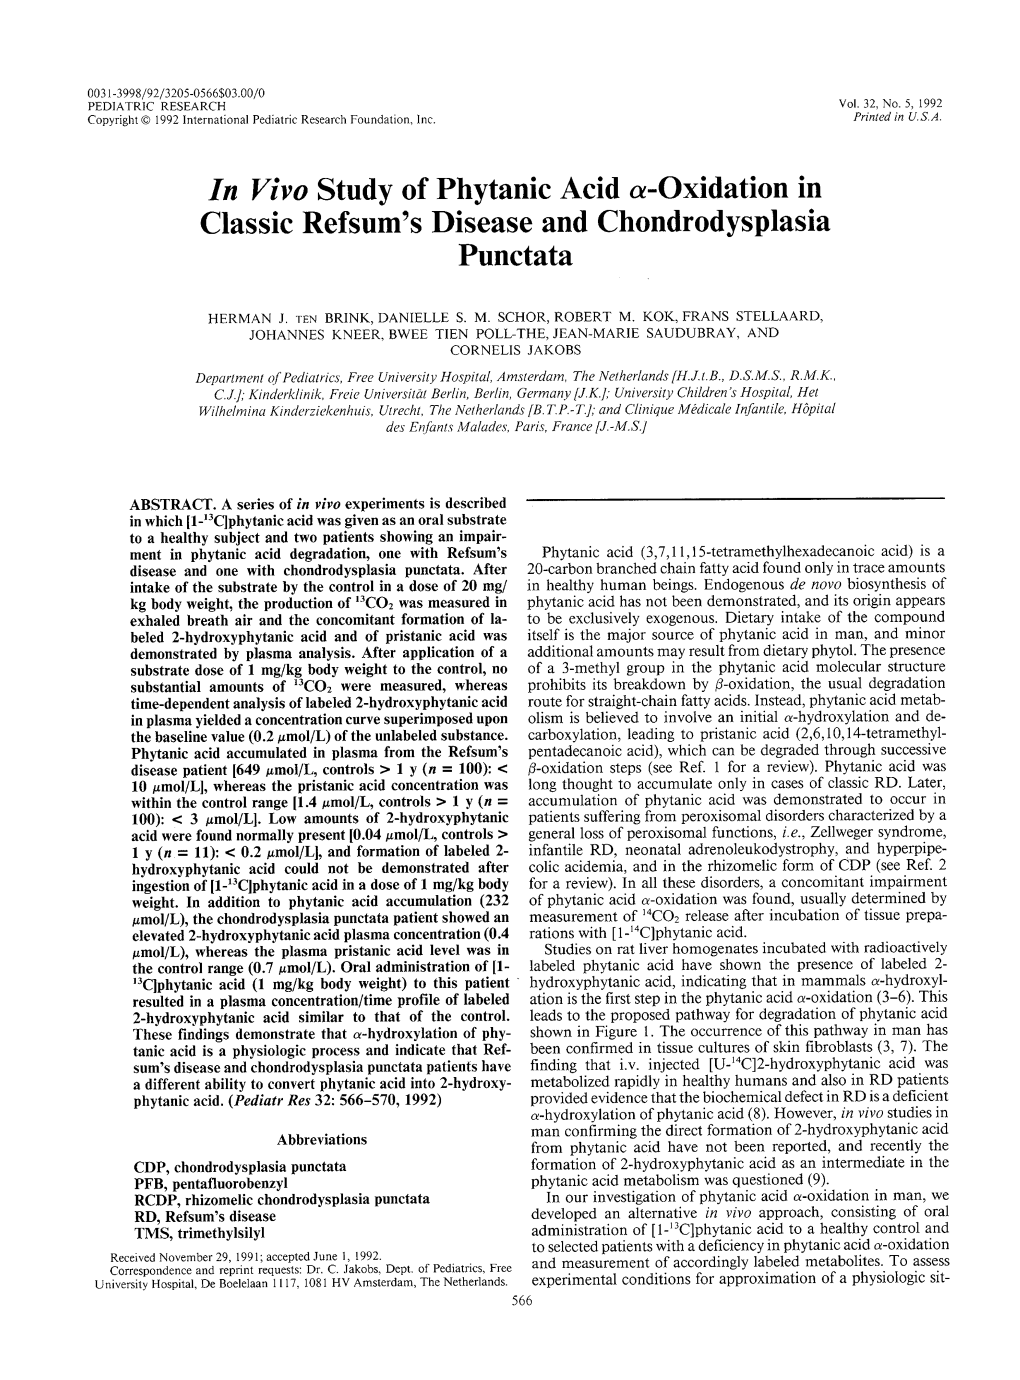 In Vivo Study of Phytanic Acid &-Oxidation in Classic Refsum's